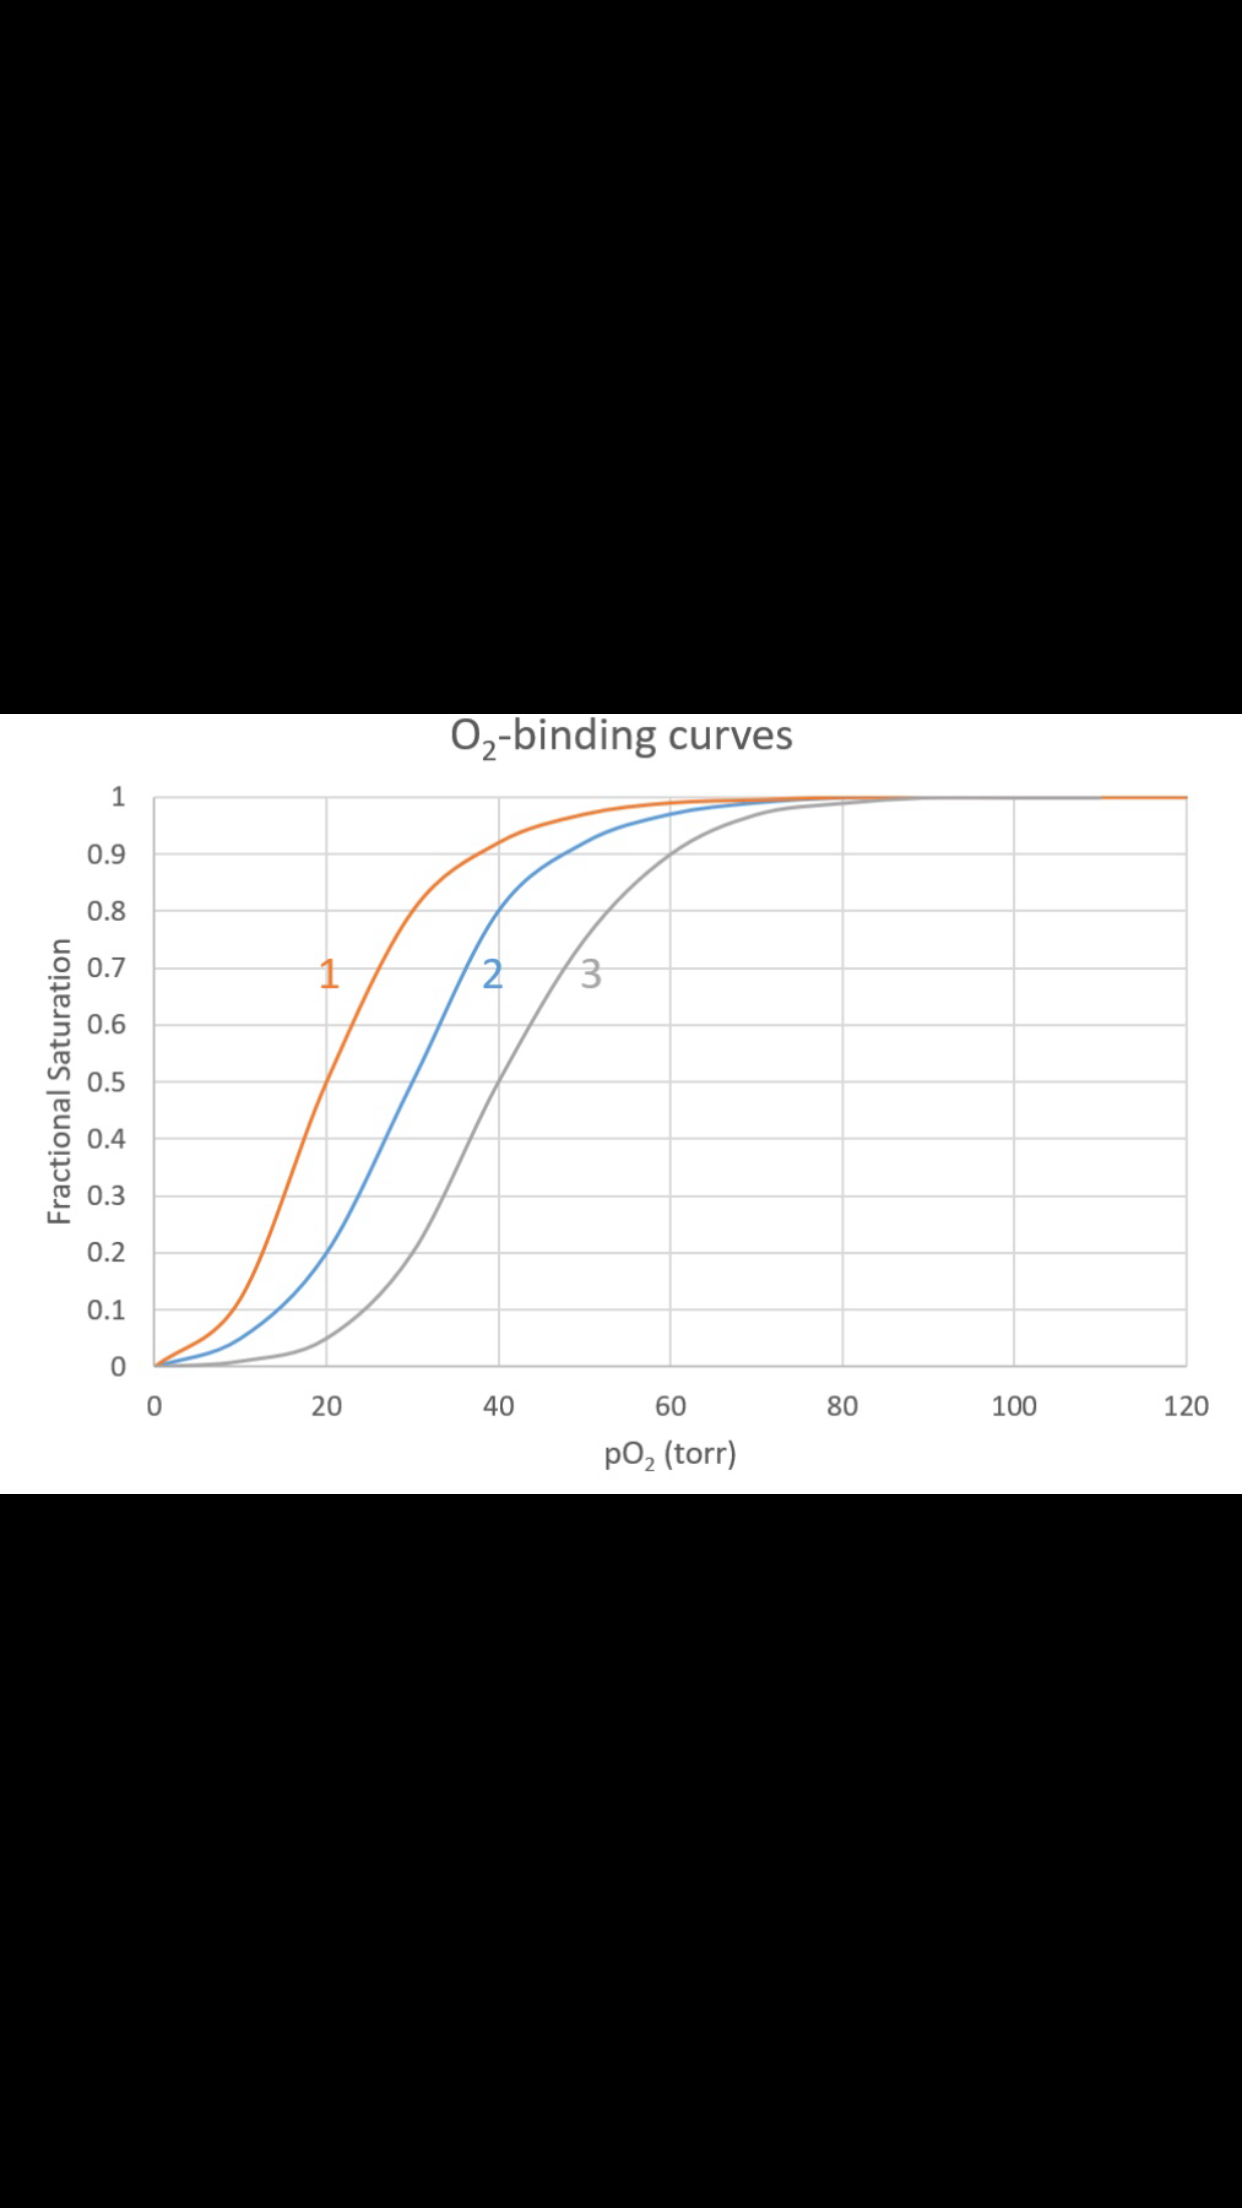 O2-binding curves
1
0.9
0.8
2
0.7
3
0.6
0.5
0.4
0.3
0.2
0.1
100
120
20
40
60
80
po2 (torr)
Fractional Saturation
